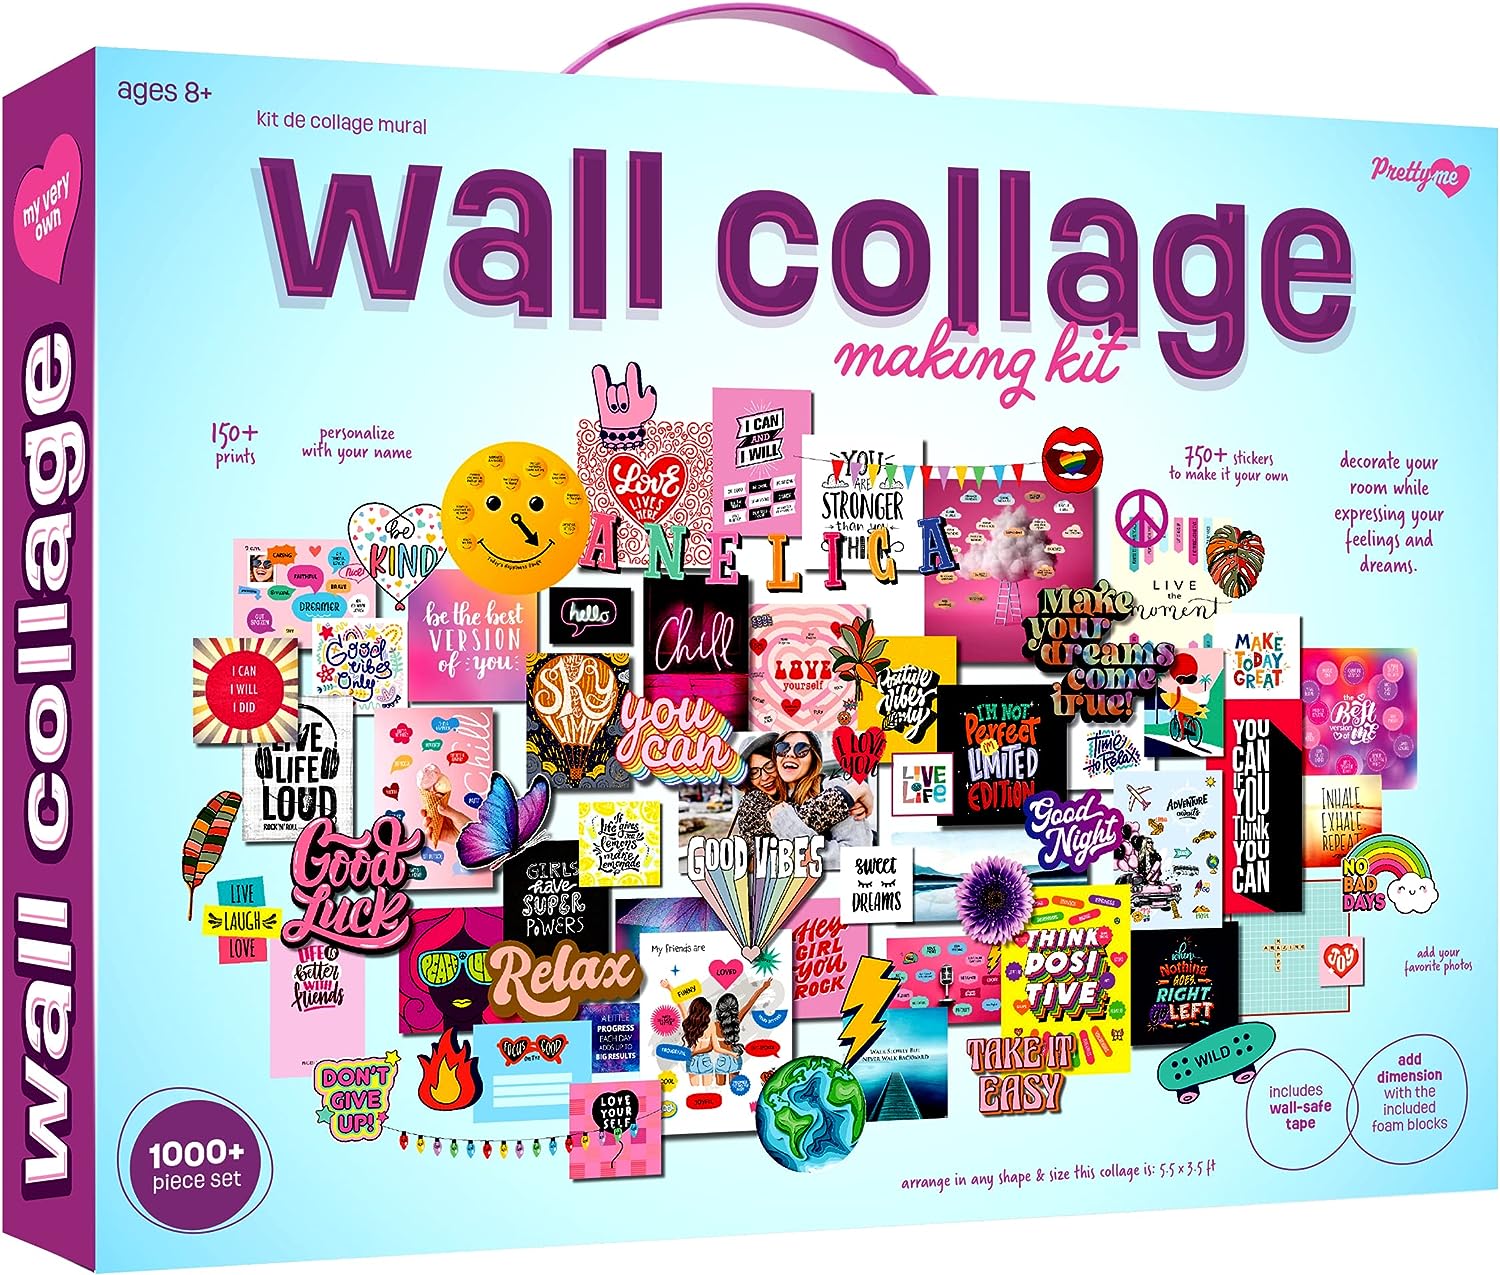 Diy Wall Collage Kit Review 